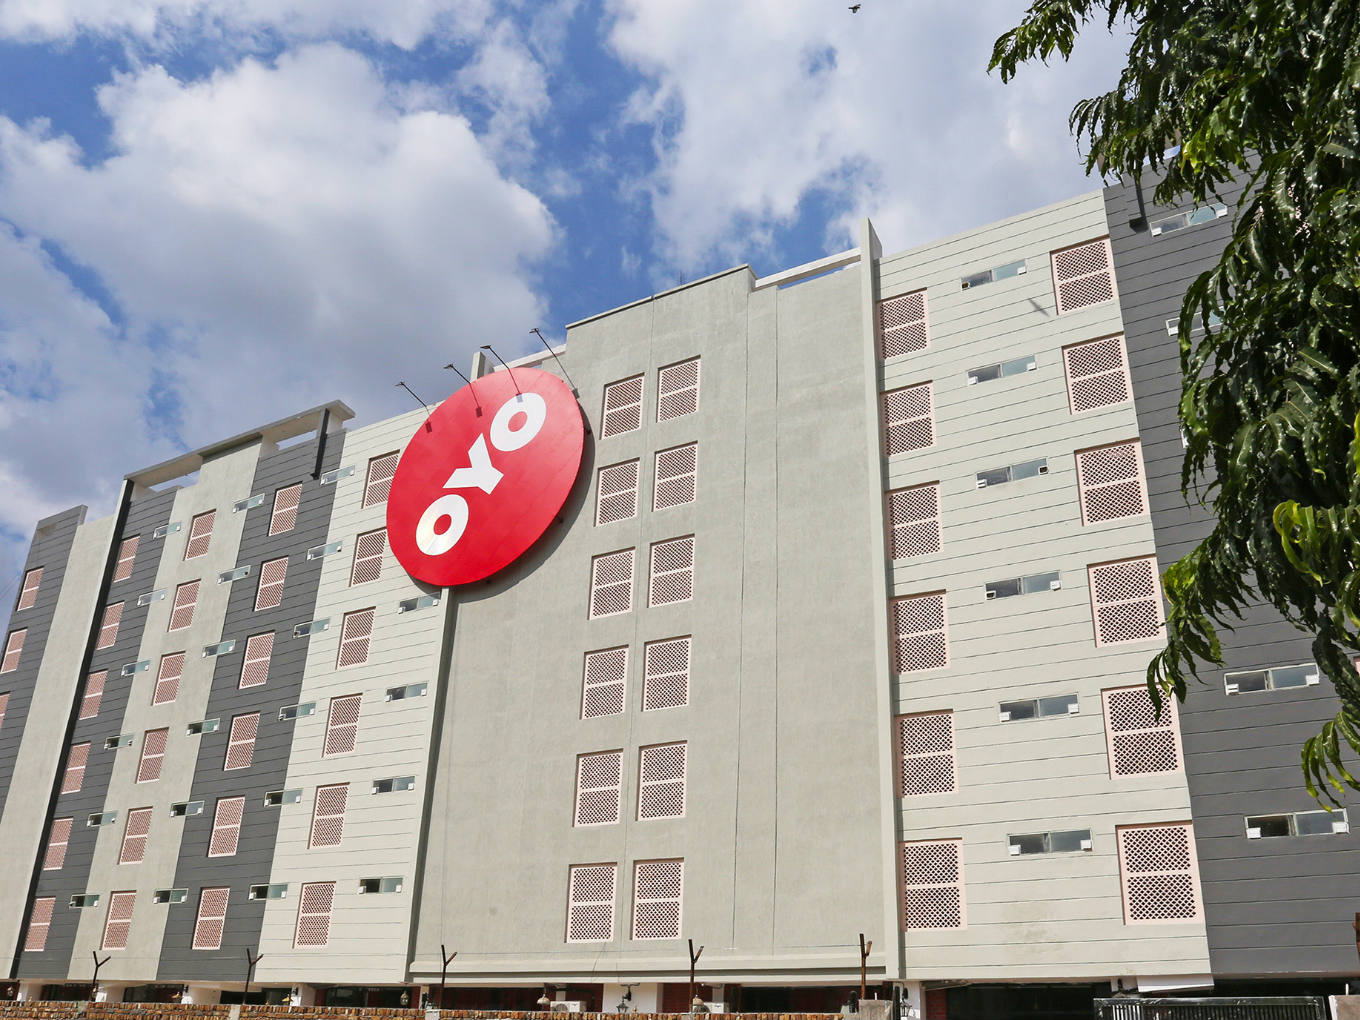 OYO Ties Up With SoftBank To Launch OYO Hotels In Japan